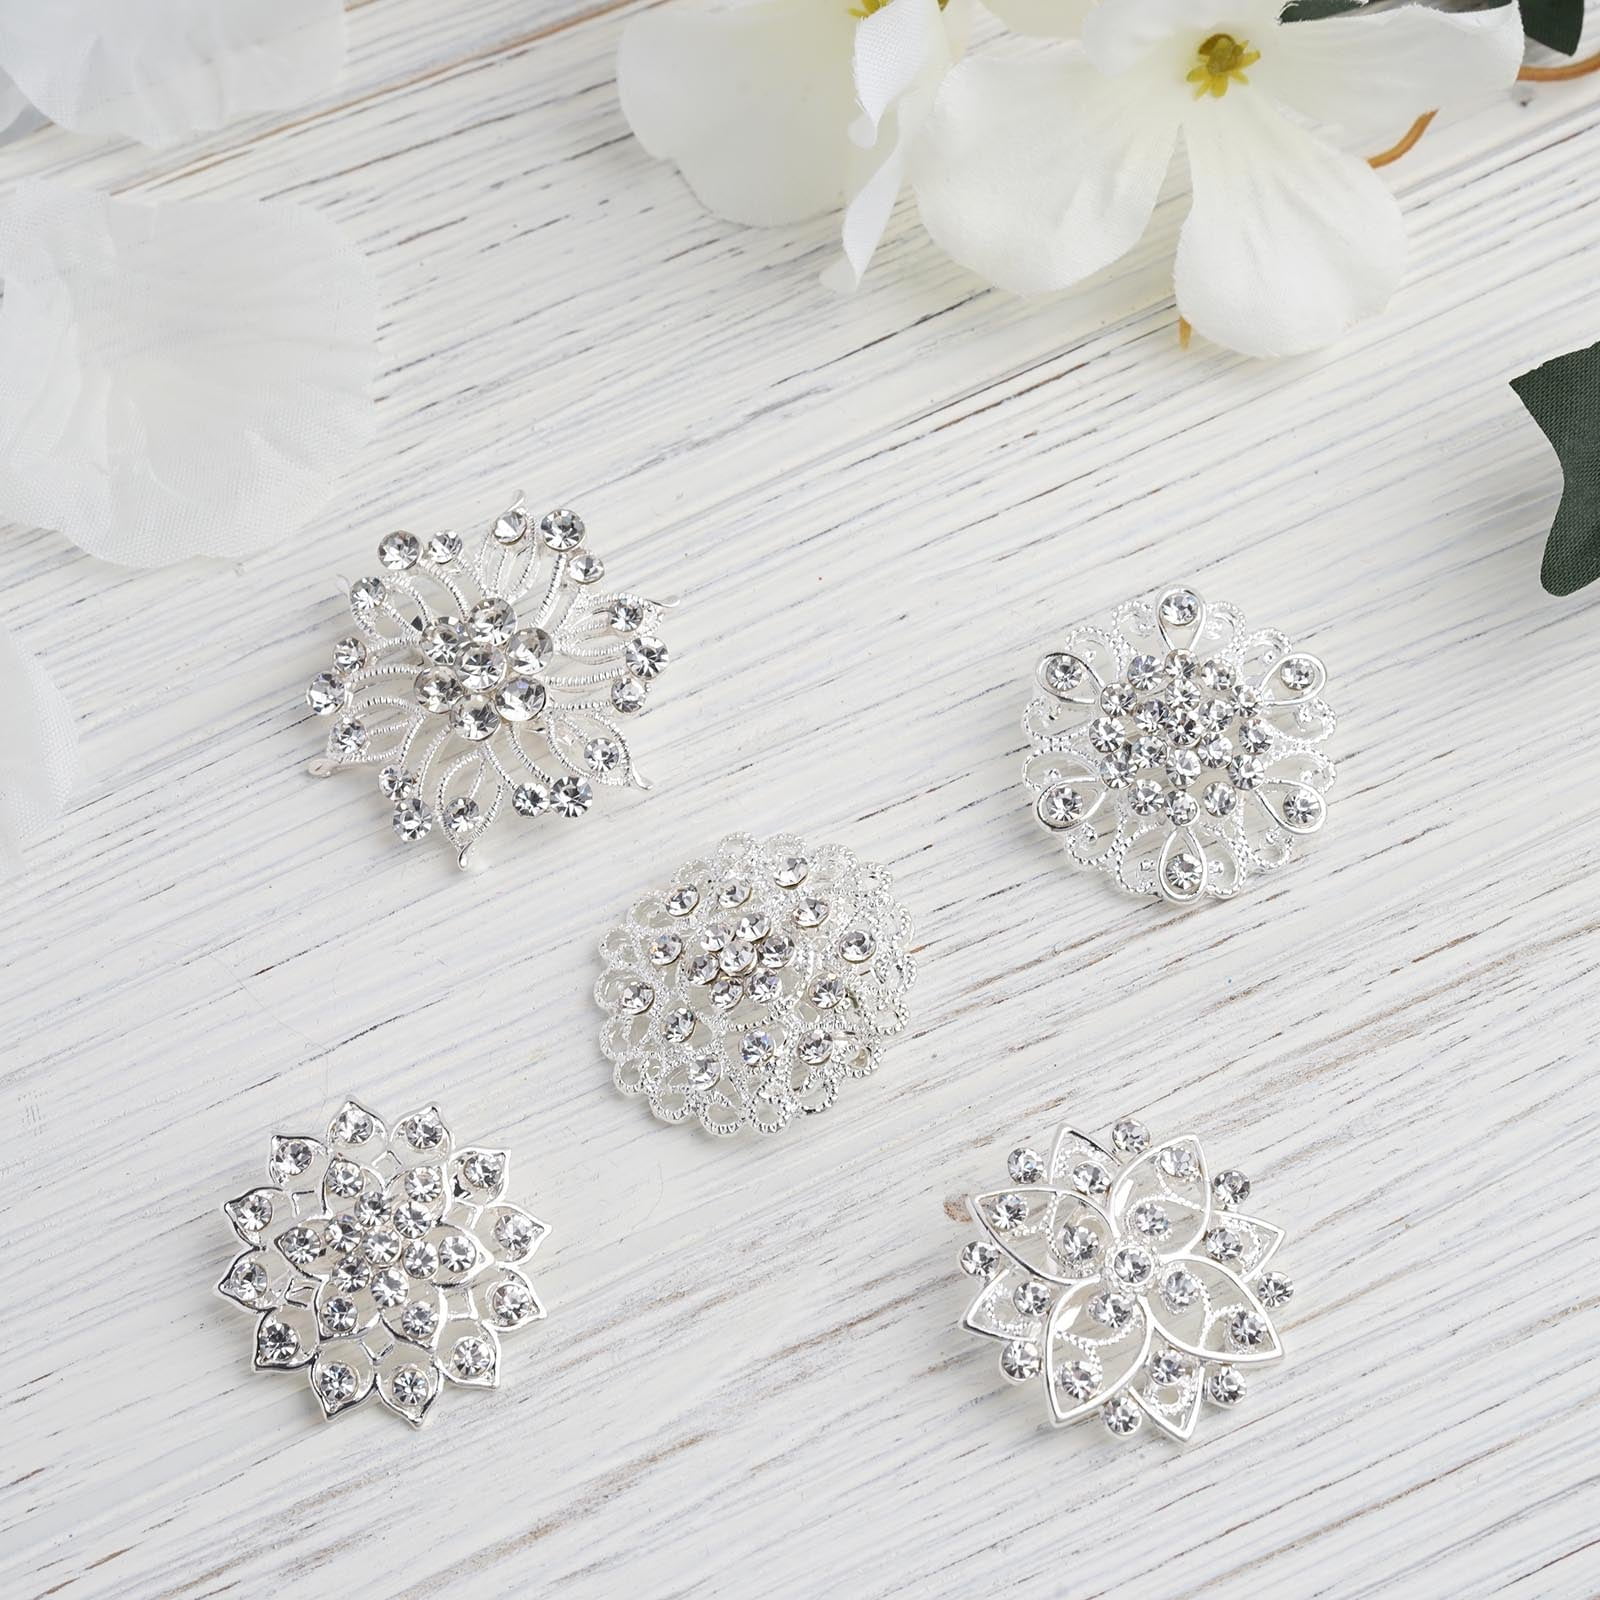 1.5 Silver Fashion Brooch Pin with Iridescent Rhinestones - Pack of 12 -  CB Flowers & Crafts